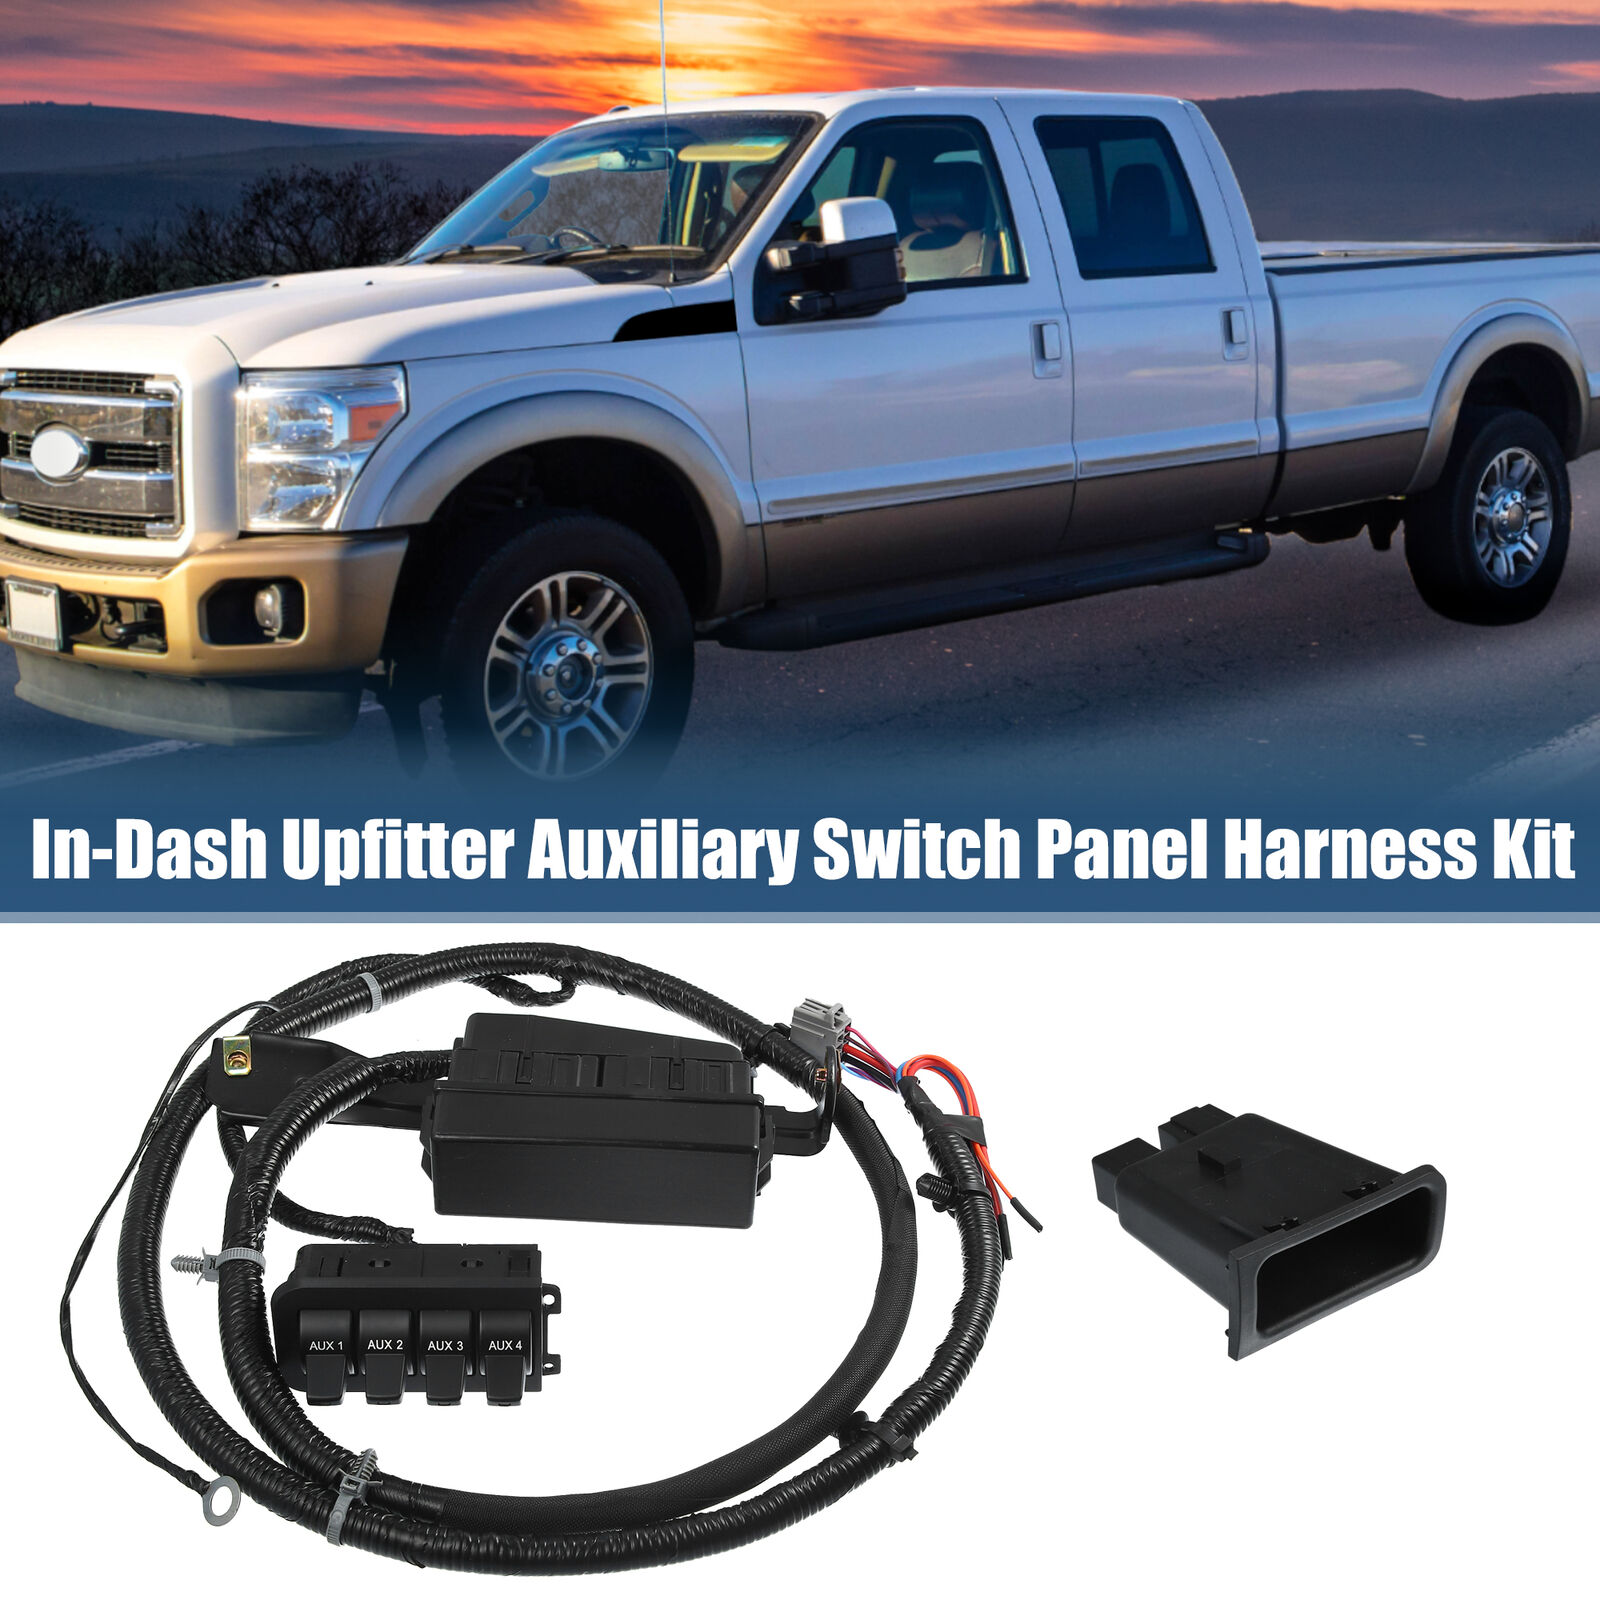 In-Dash Auxiliary Upfitter Switch Panel for Ford F250 F350 05-07 5C3Z14A303AA